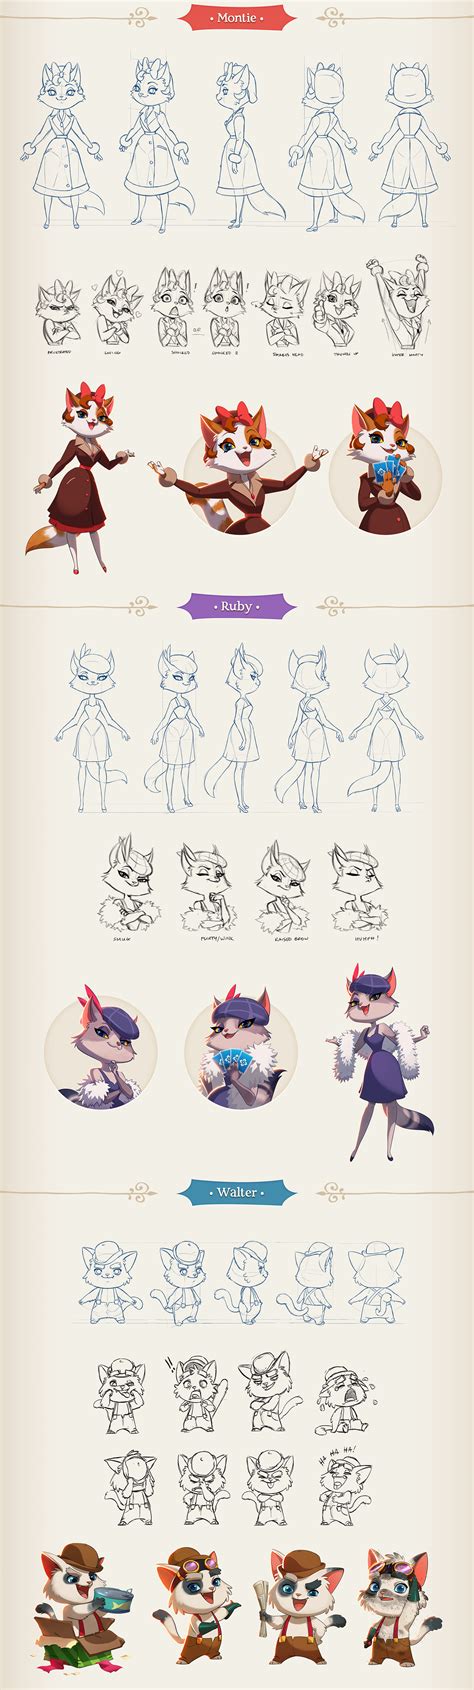 Shuffle Cats The Characters On Behance Animation Character Drawings Concept Art Characters